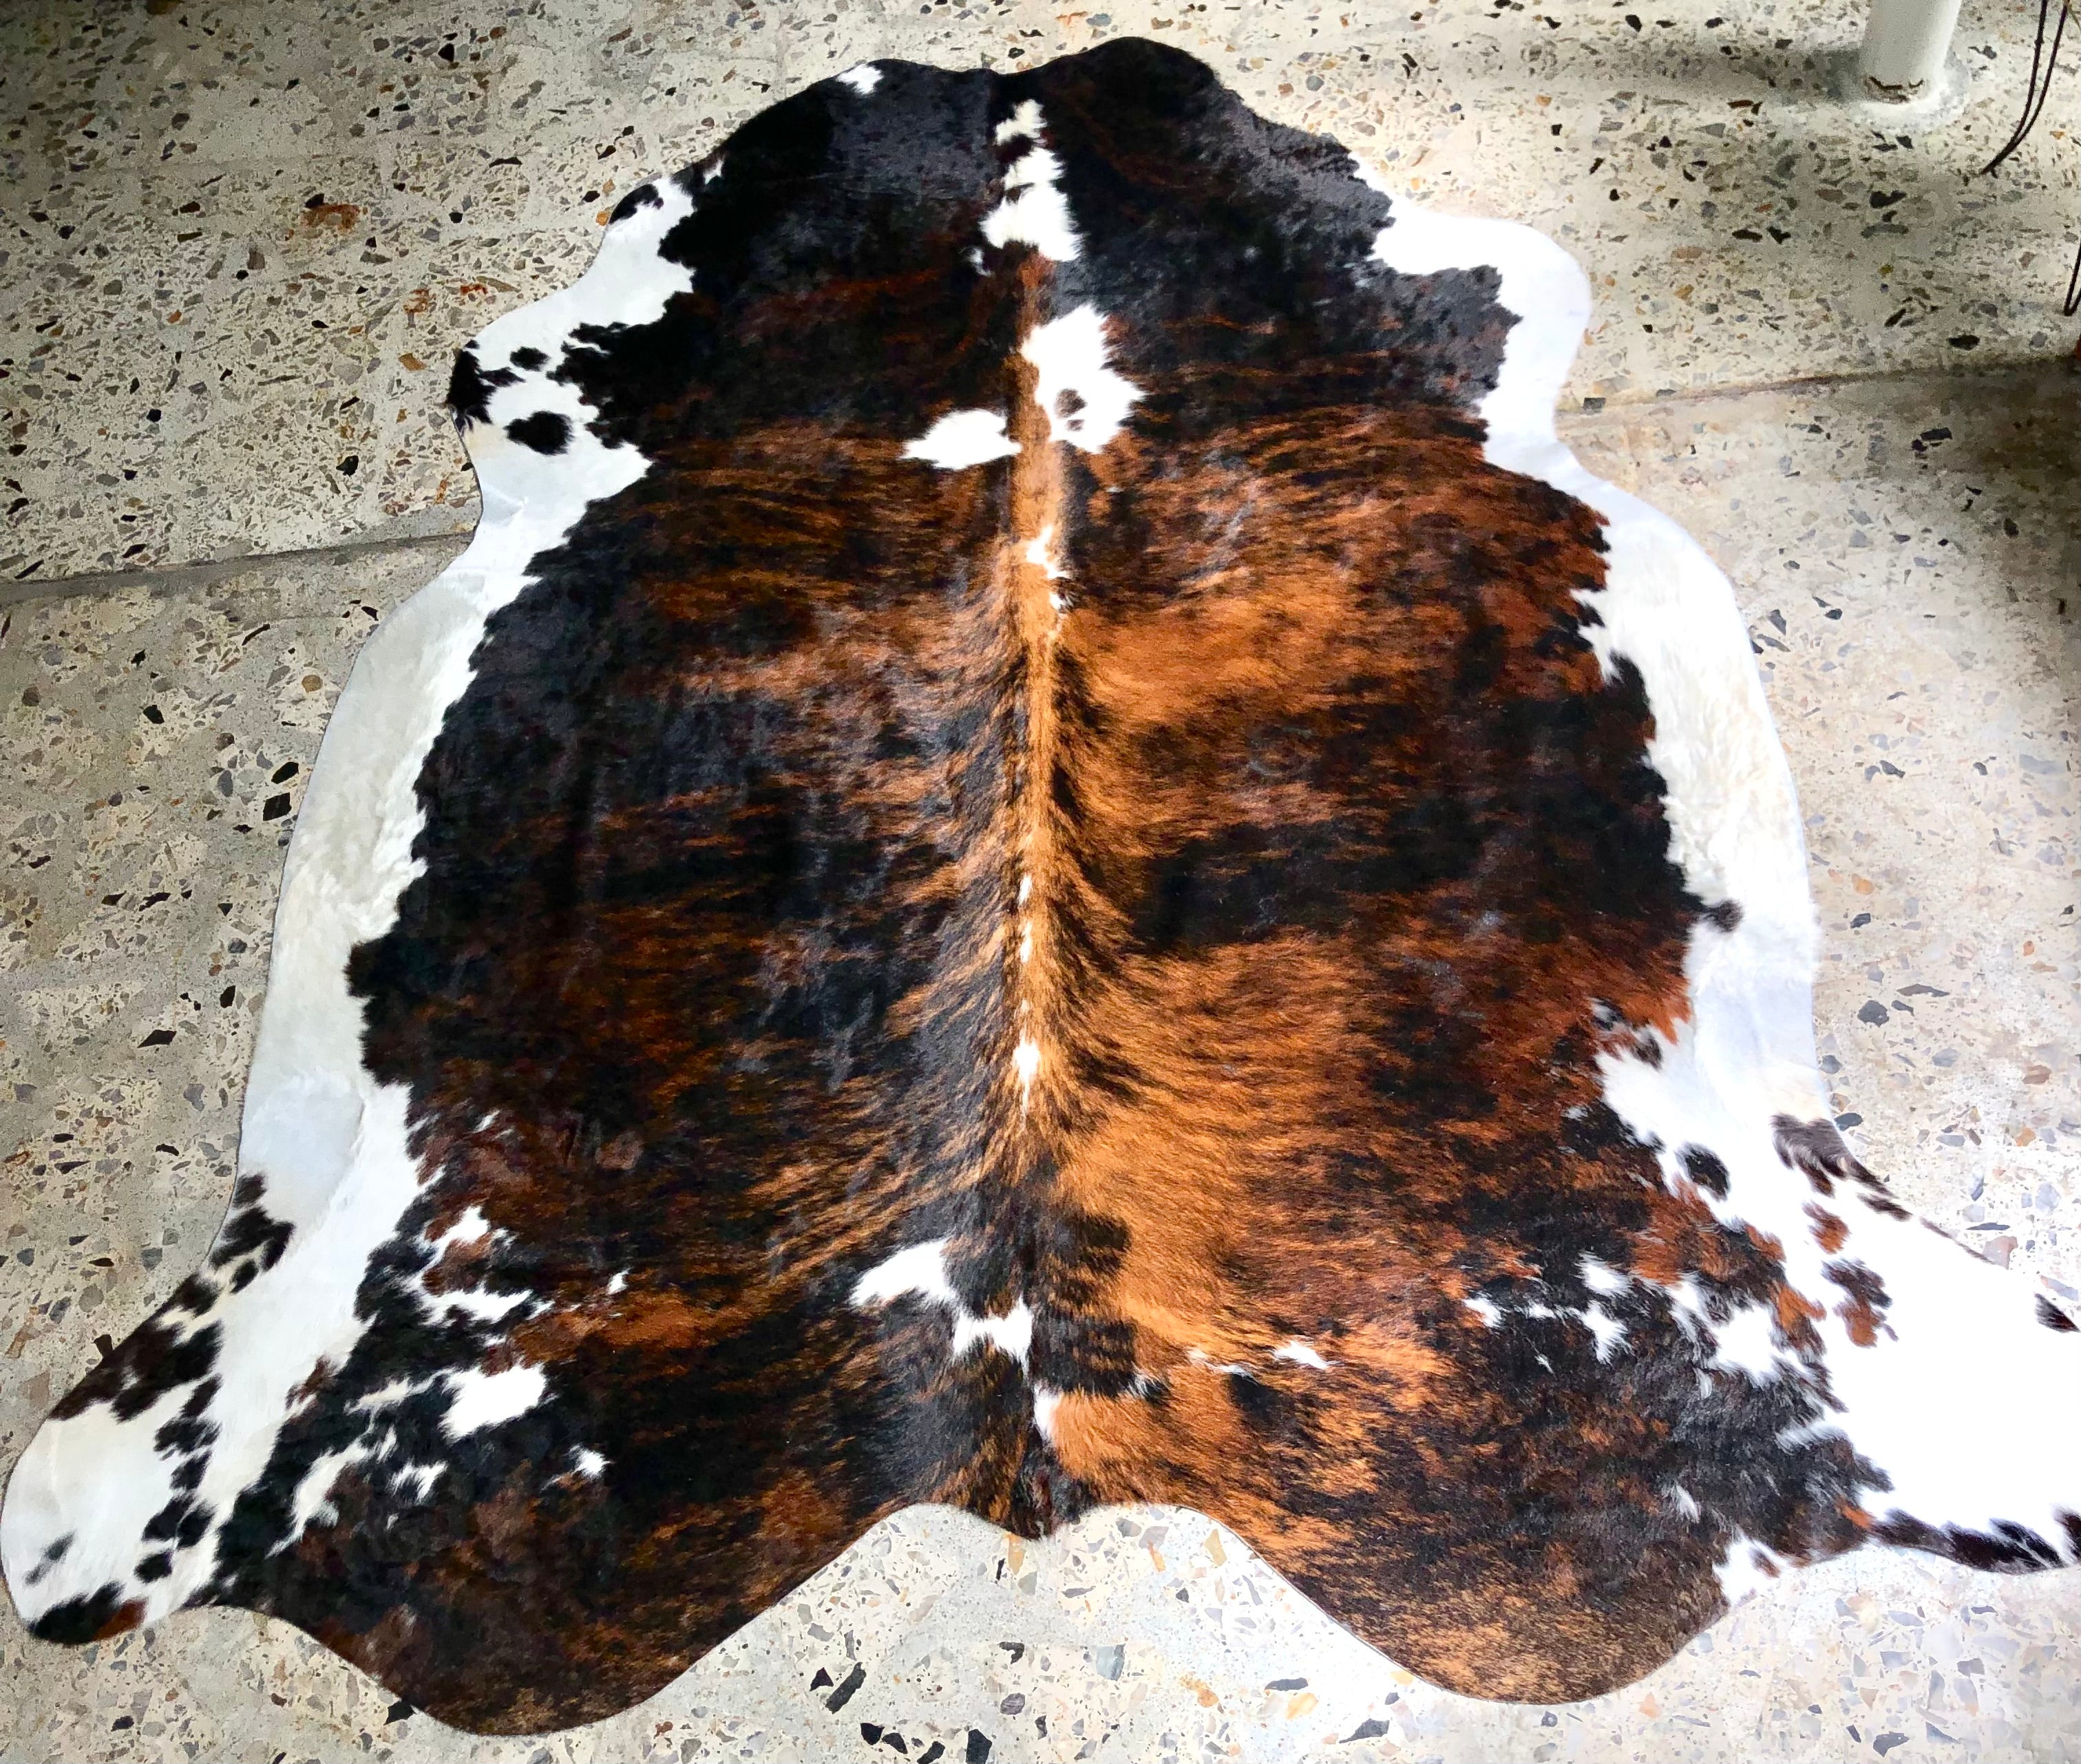 Contemporary Cowhide Rugs Online Authentic Cow Hide For Gallery Texascowhidegallery Com